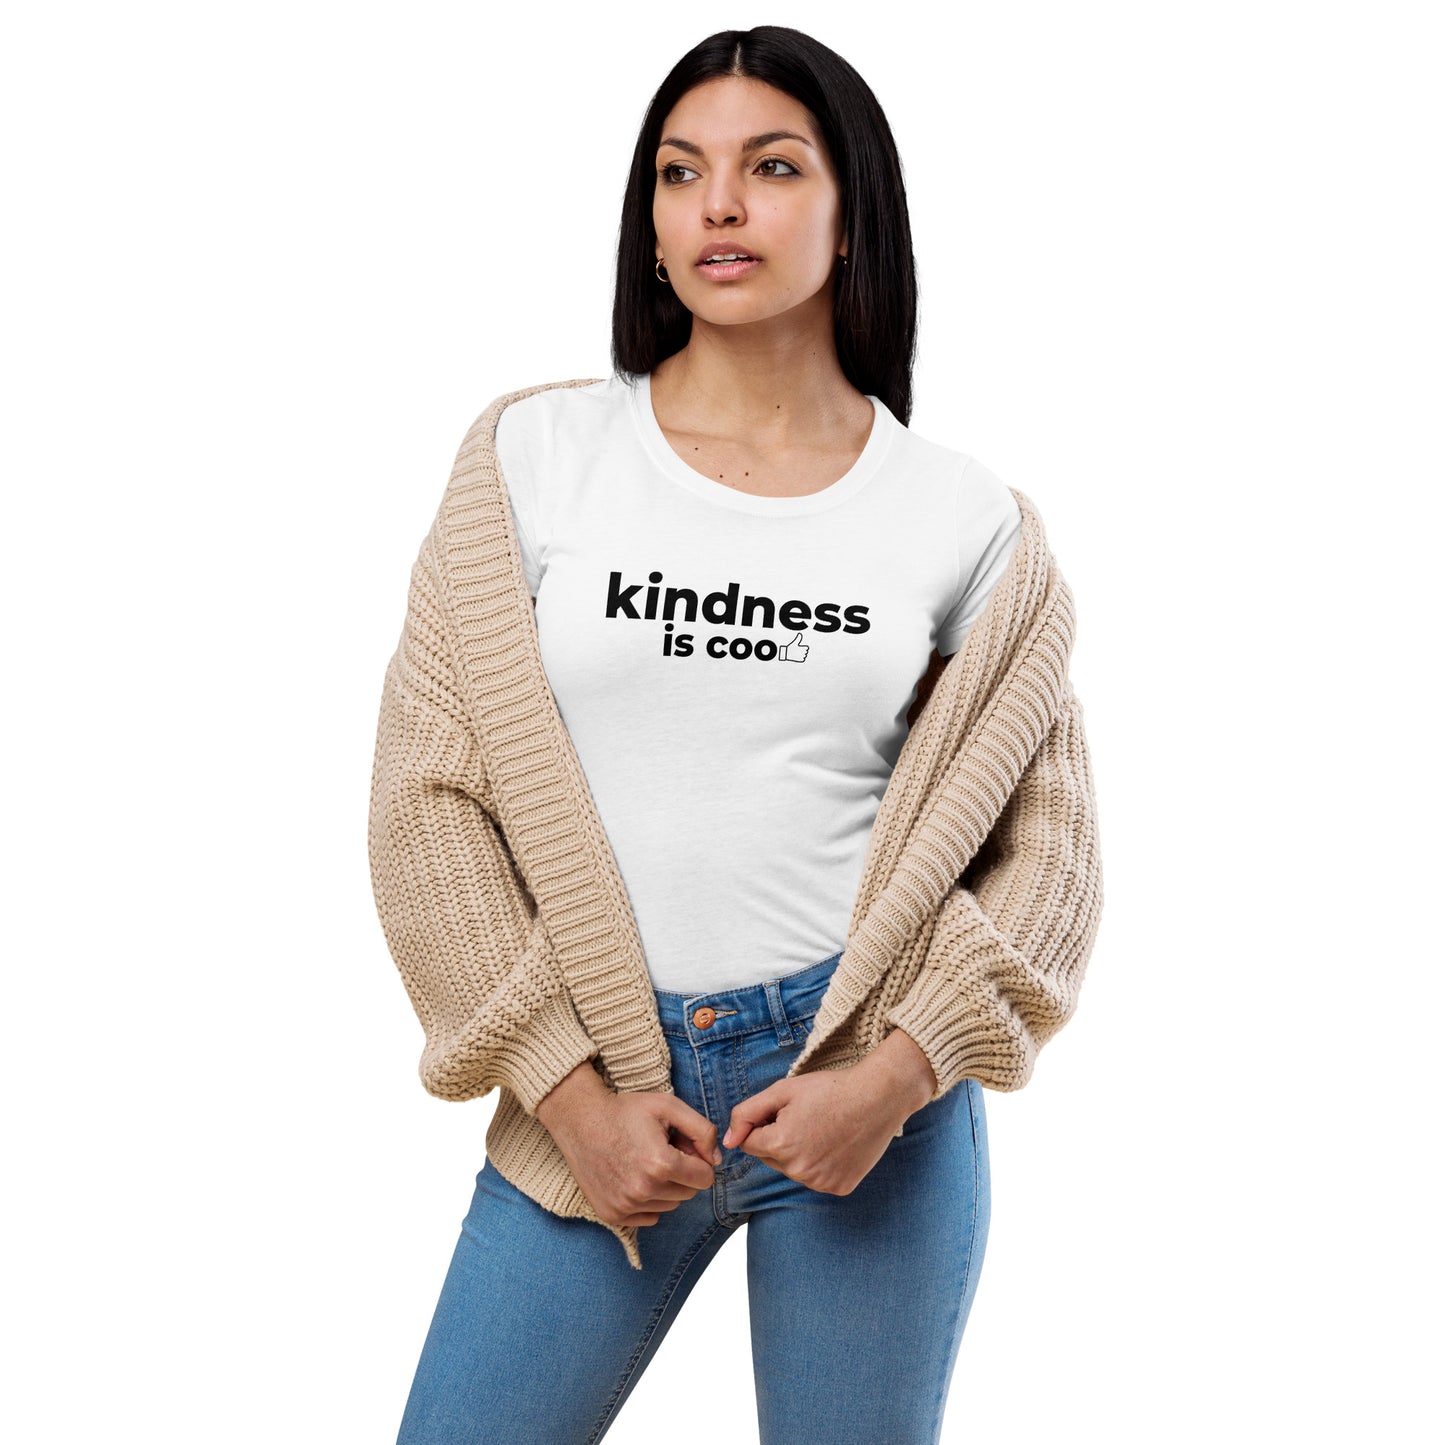 KINDNESS IS COOL - Women’s fitted t-shirt